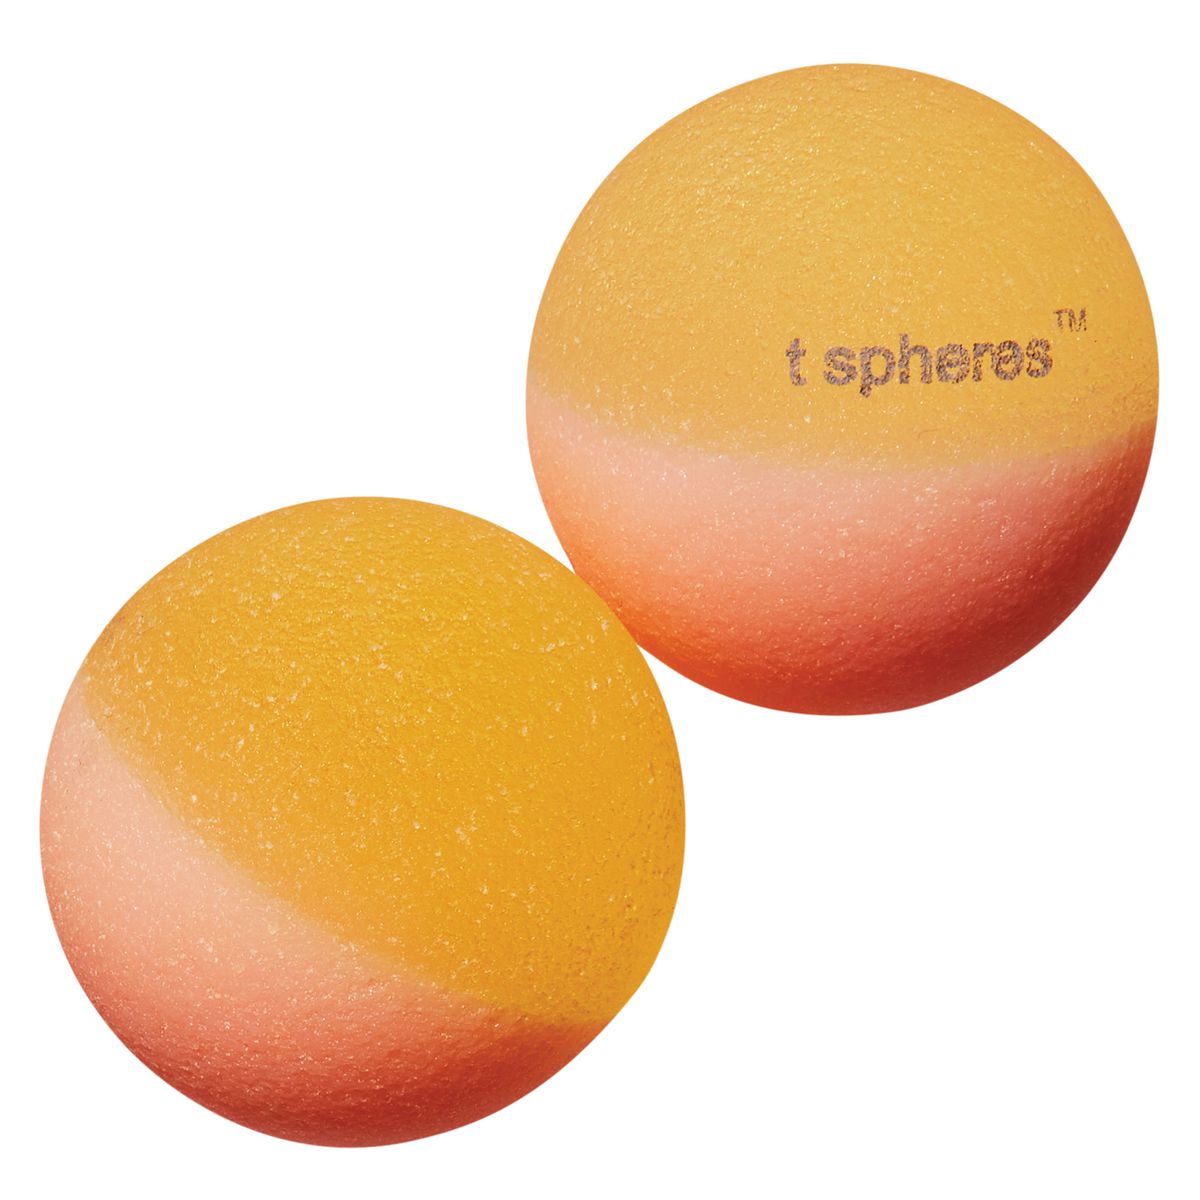 T Spheres aromatherapy-infused massage balls